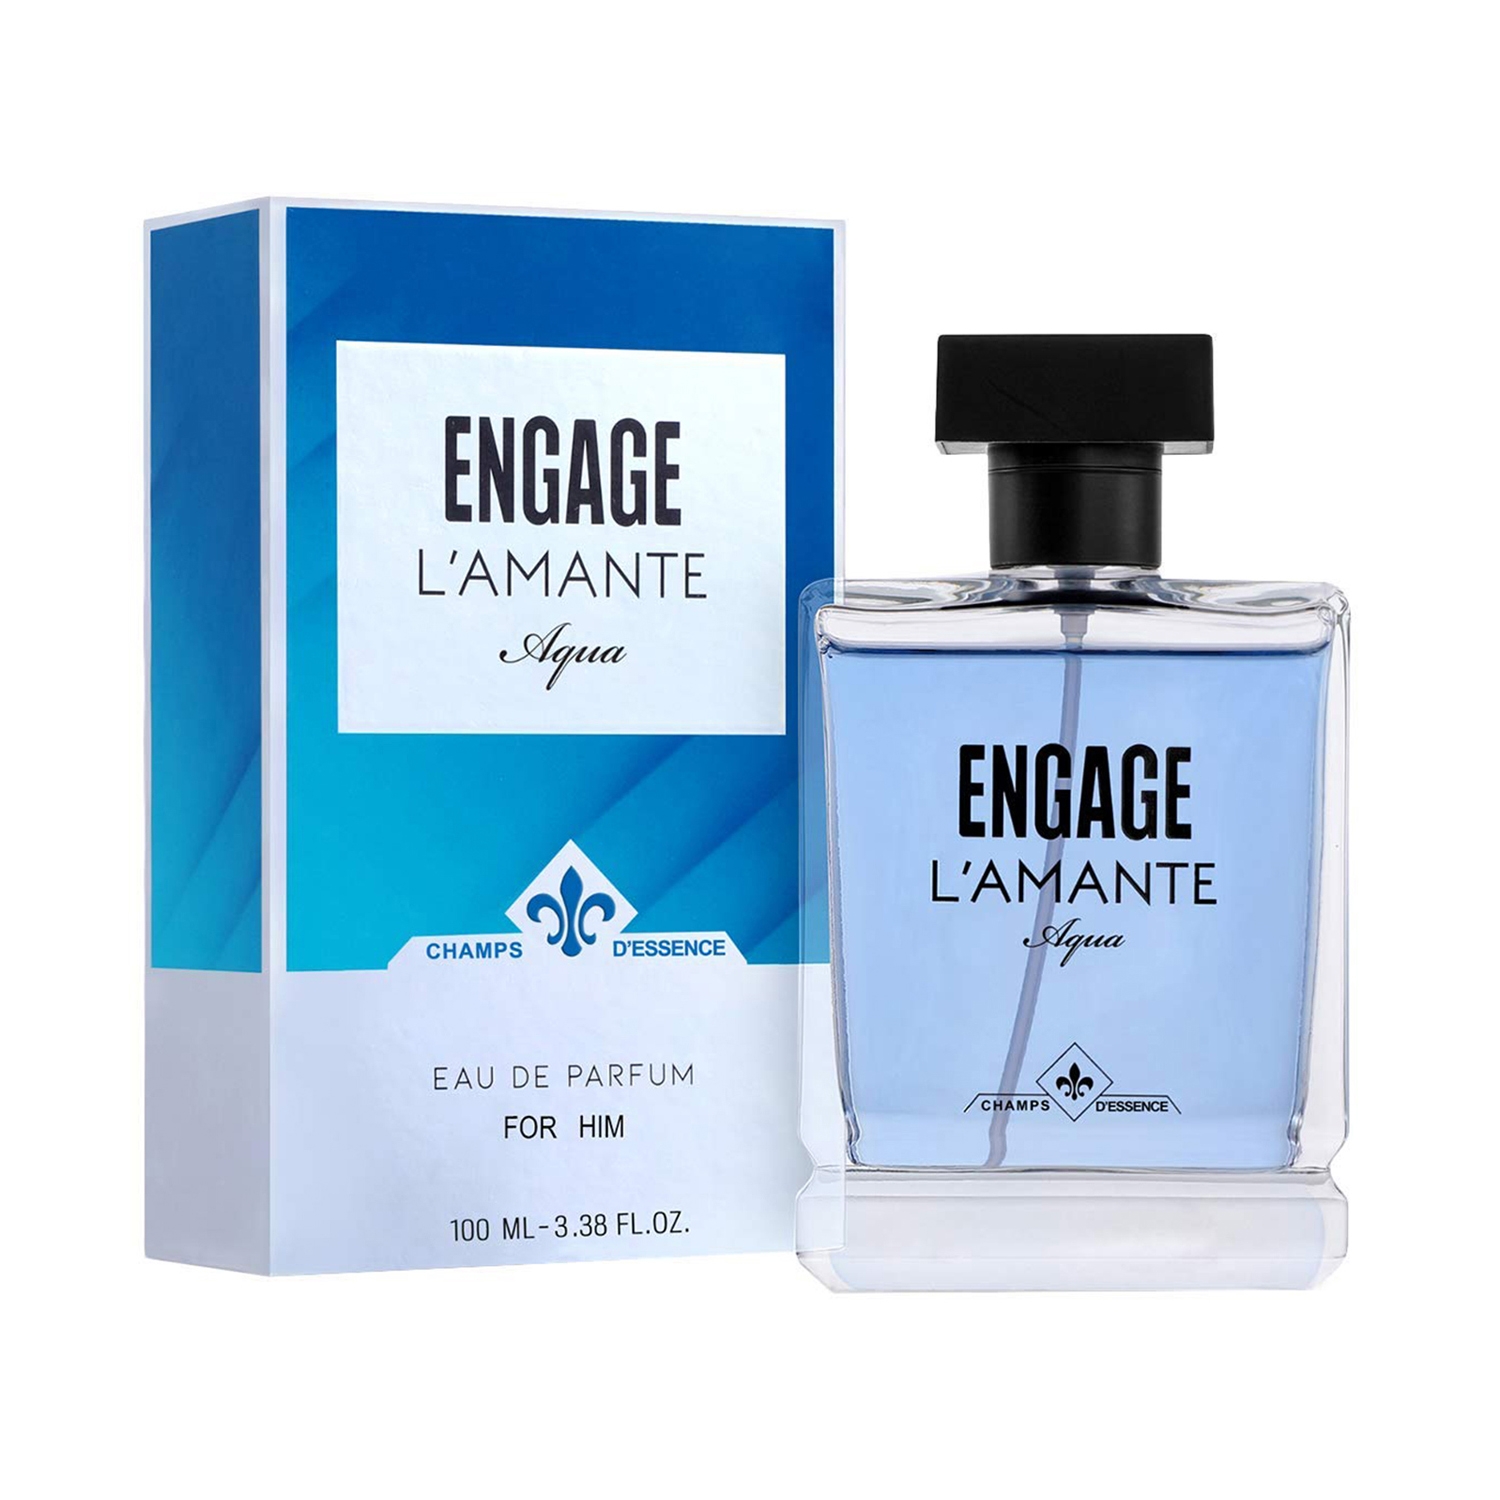 Engage Luxury Perfume Gift Pack for Men, Travel Sized, Assorted Pack